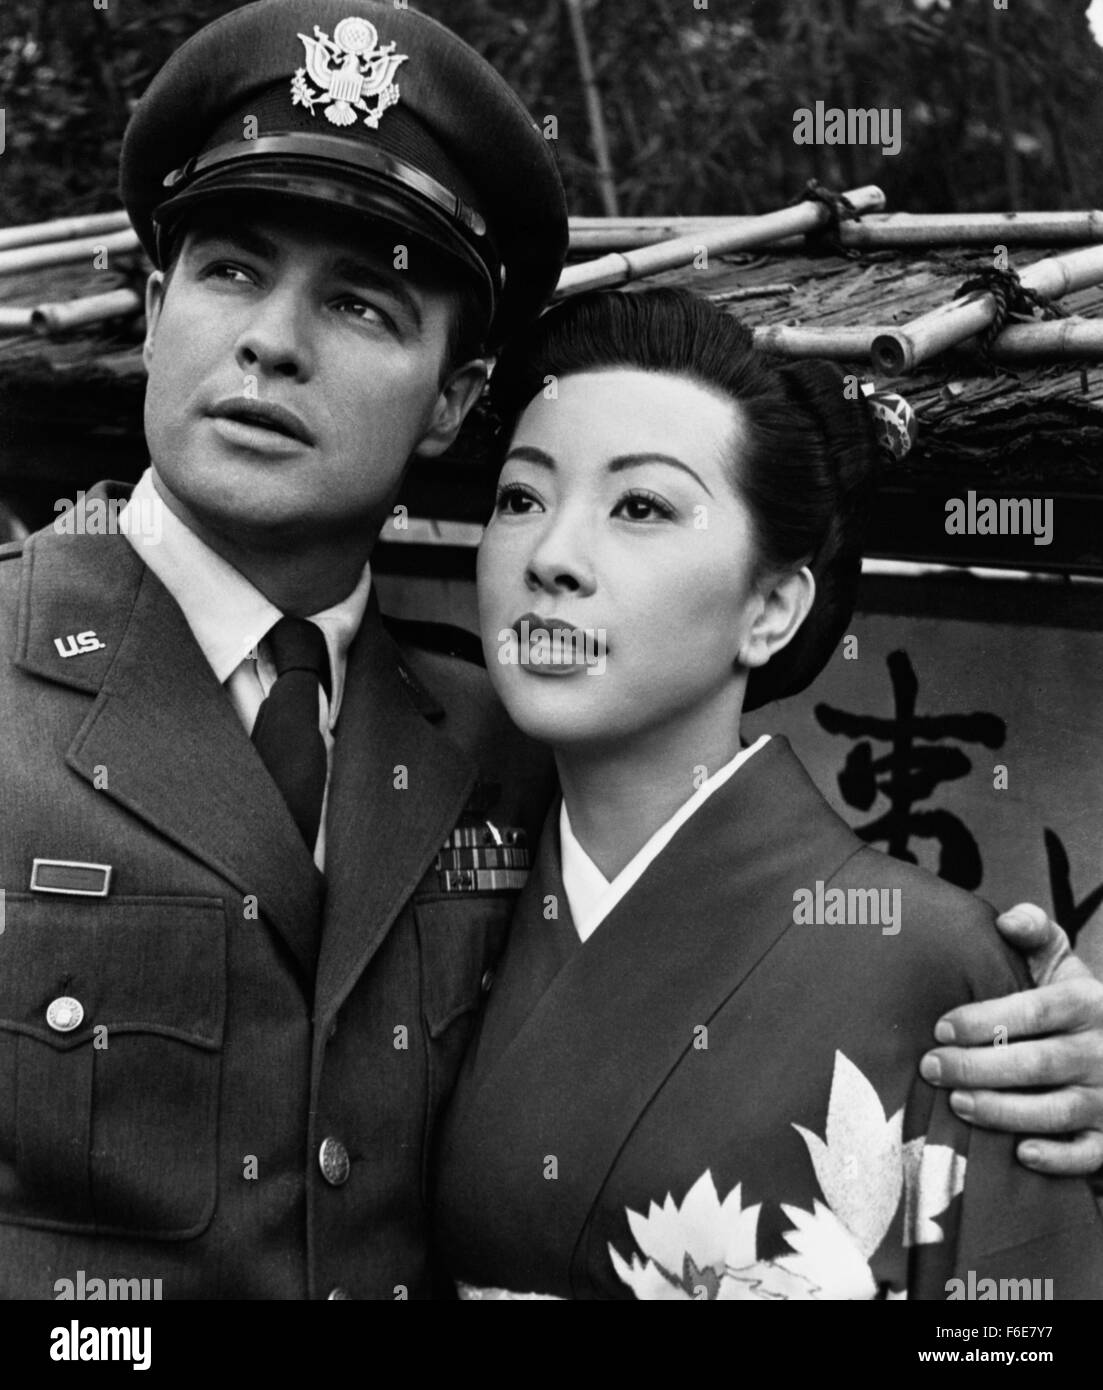 RELEASE DATE: December 5, 1957. MOVIE TITLE: Sayonara. STUDIO: Pennebaker Productions. PLOT: Major Lloyd Gruver, a Korean War flying ace reassigned to Japan, staunchly supports the military's opposition to marriages between American troops and Japanese women. But that's before Gruver experiences a love that challenges his own deeply set prejudices... and plunges him into conflict with the U.S. Air Force and Japan's own cultural taboos. PICTURED: MARLON BRANDO as Maj. Lloyd 'Ace' Gruver. Stock Photo